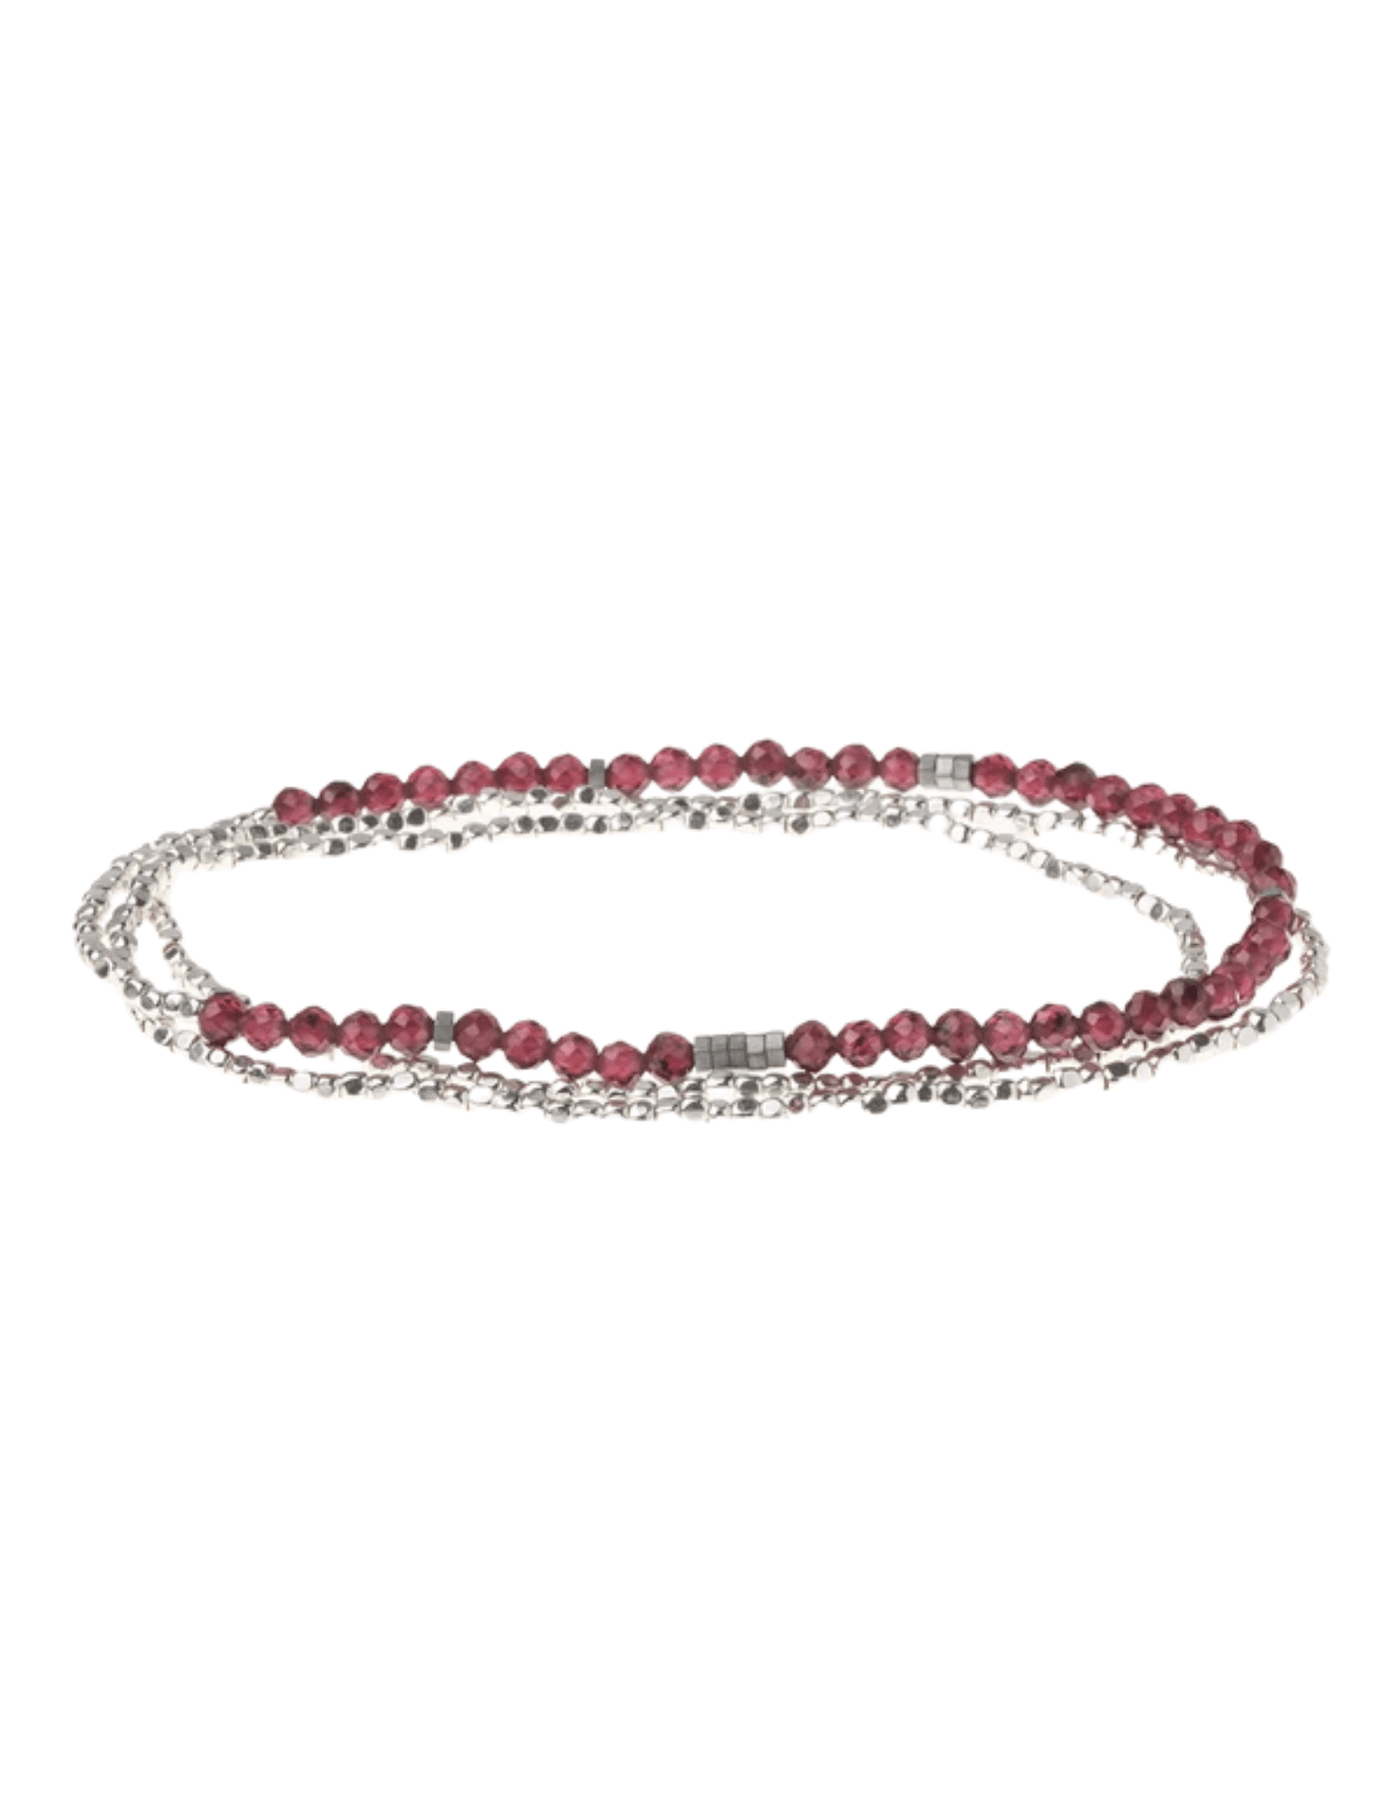 SCOUT CURATED WEARS Jewelry Delicate Stone Garnet/Silver Wrap